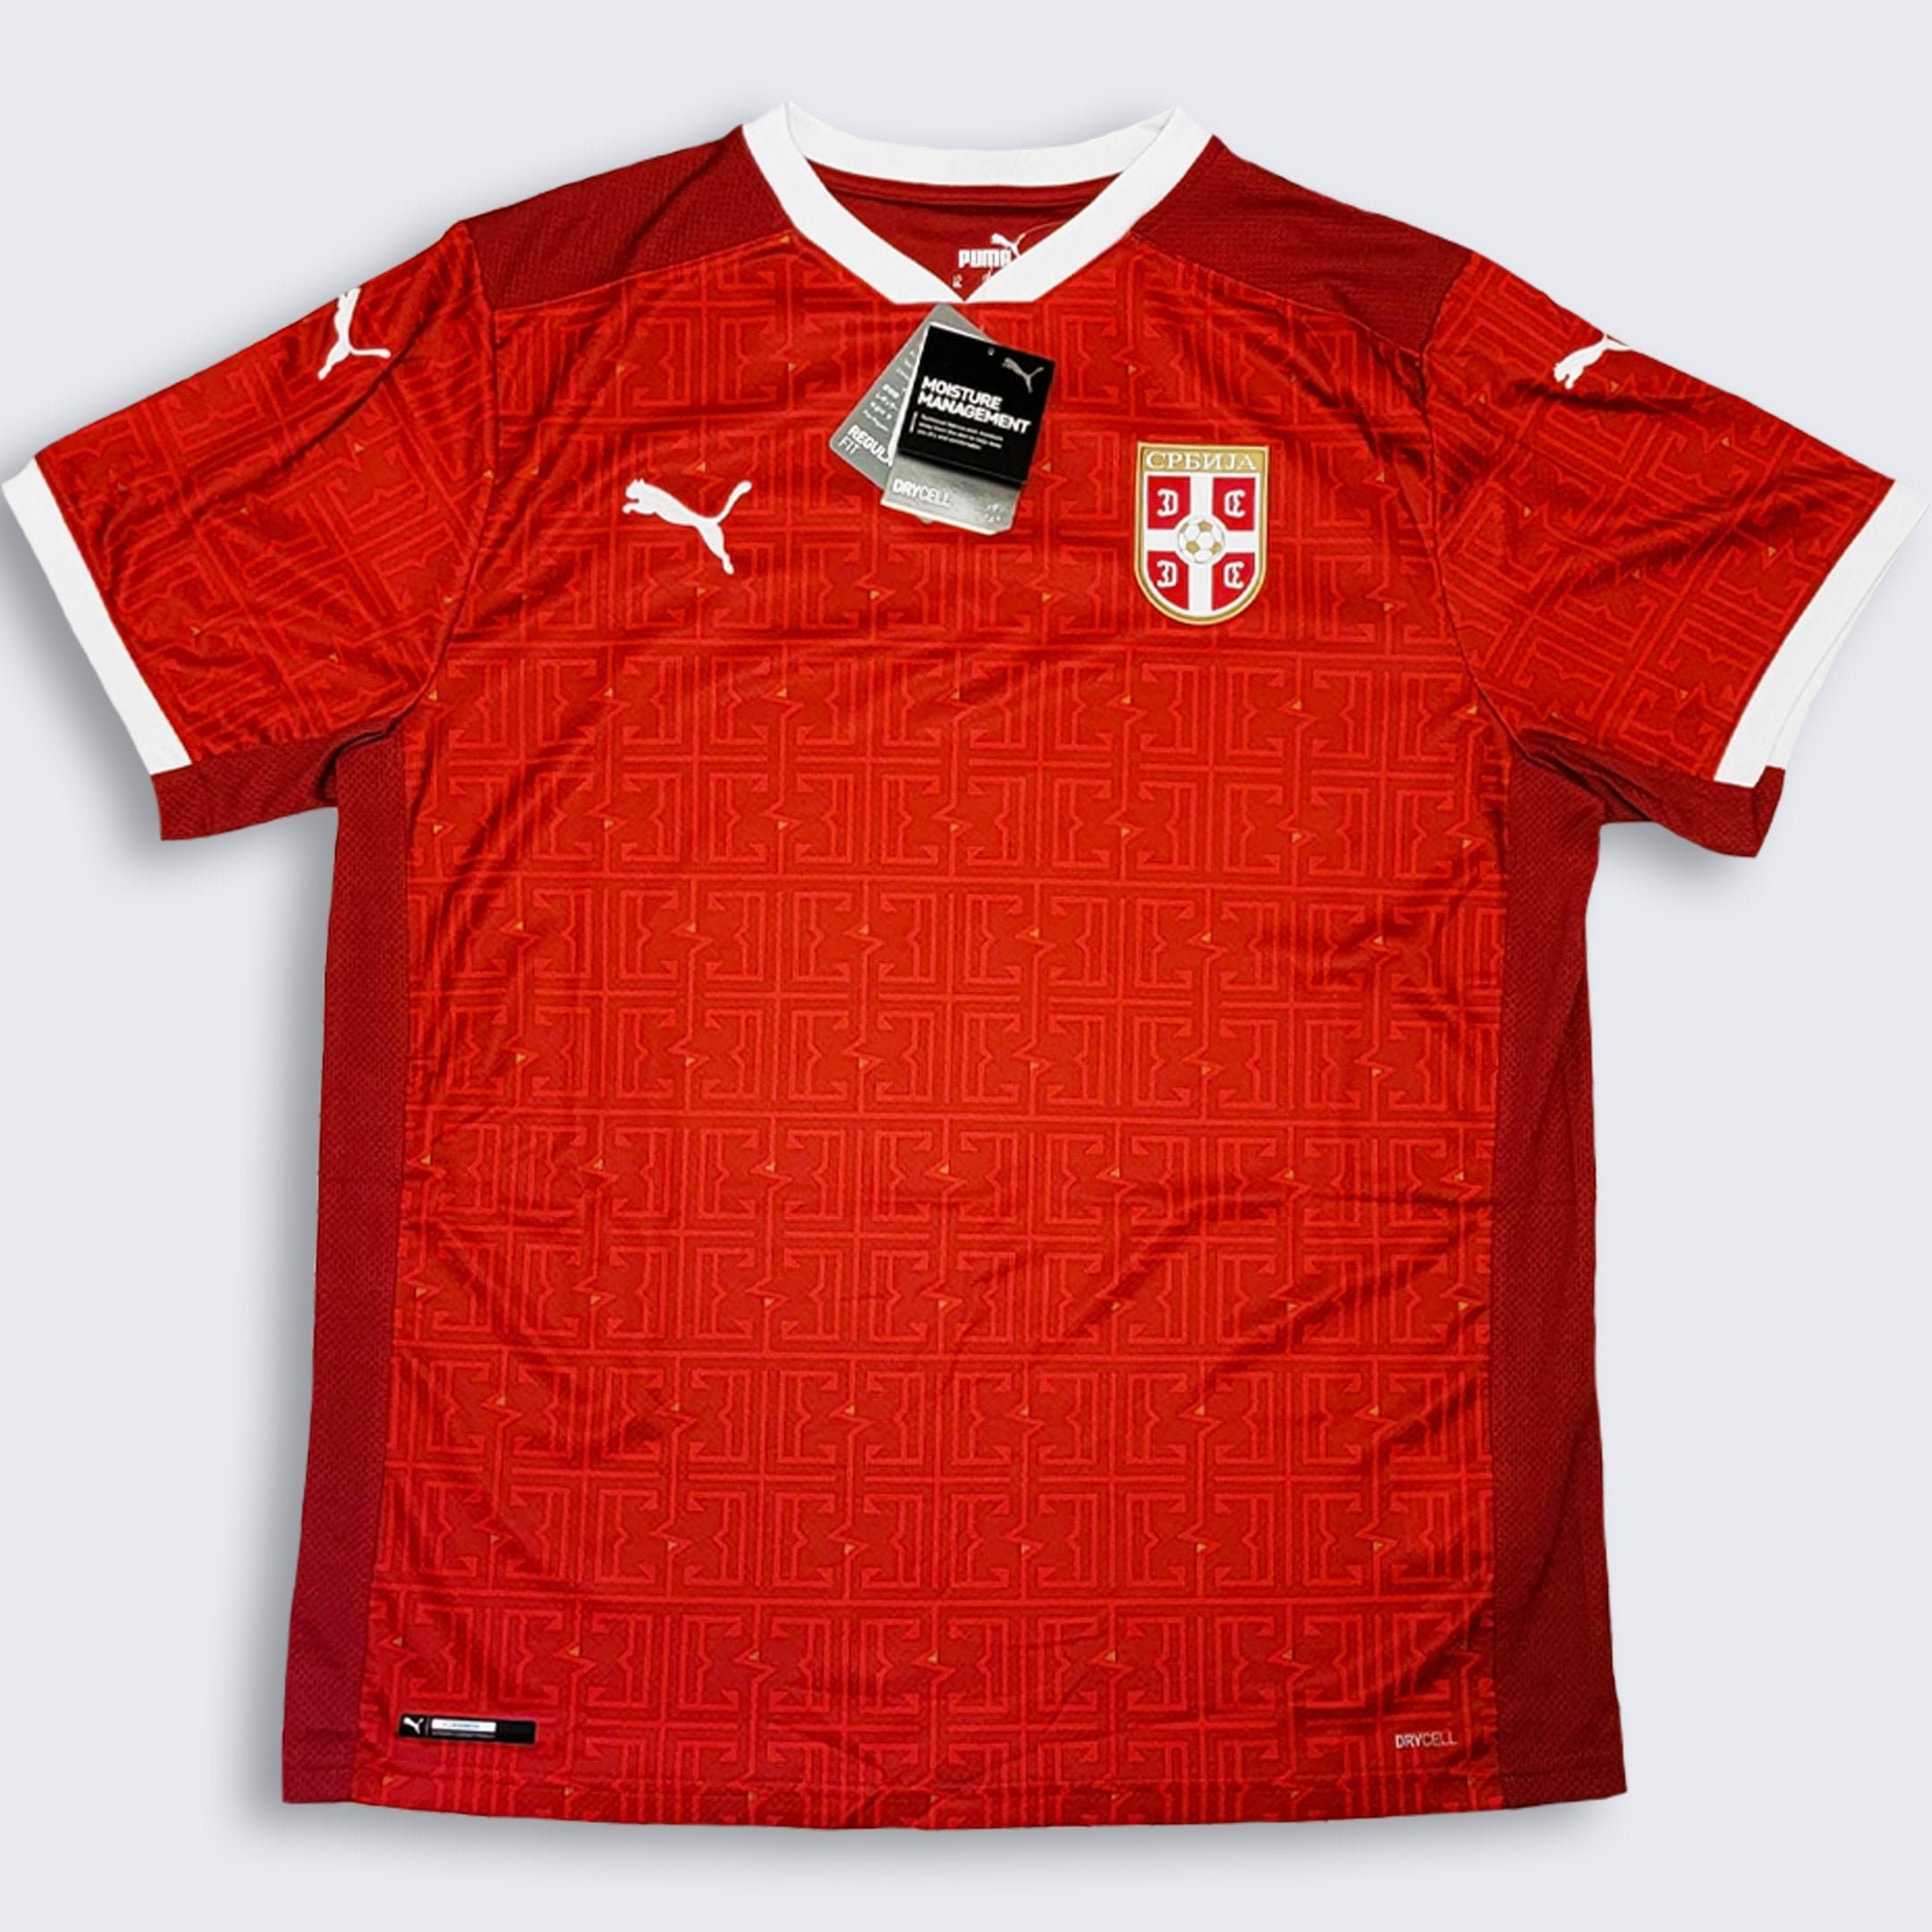 Serbia Brand New Red Soccer Jersey Etsy